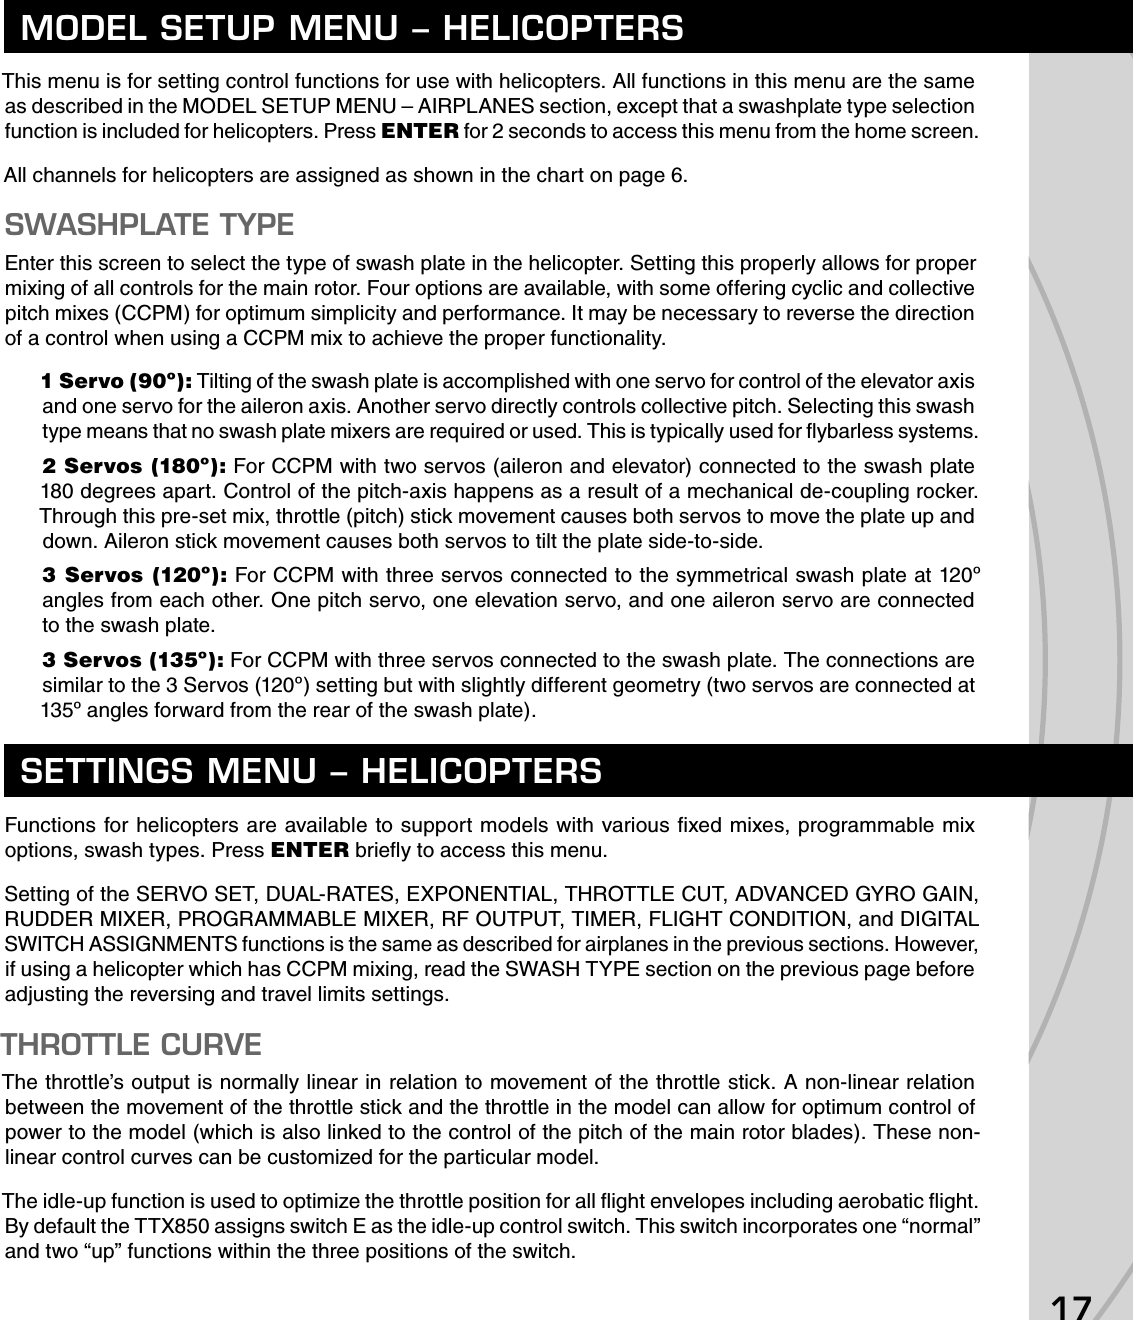 17This menu is for setting control functions for use with helicopters. All functions in this menu are the same as described in the MODEL SETUP MENU – AIRPLANES section, except that a swashplate type selection function is included for helicopters. Press ENTER for 2 seconds to access this menu from the home screen.All channels for helicopters are assigned as shown in the chart on page 6.SWASHPLATE TYPEEnter this screen to select the type of swash plate in the helicopter. Setting this properly allows for proper mixing of all controls for the main rotor. Four options are available, with some offering cyclic and collective pitch mixes (CCPM) for optimum simplicity and performance. It may be necessary to reverse the direction of a control when using a CCPM mix to achieve the proper functionality.1 Servo (90º): Tilting of the swash plate is accomplished with one servo for control of the elevator axis and one servo for the aileron axis. Another servo directly controls collective pitch. Selecting this swash type means that no swash plate mixers are required or used. This is typically used for ﬂ ybarless systems.2 Servos (180º): For CCPM with two servos (aileron and elevator) connected to the swash plate 180 degrees apart. Control of the pitch-axis happens as a result of a mechanical de-coupling rocker. Through this pre-set mix, throttle (pitch) stick movement causes both servos to move the plate up and down. Aileron stick movement causes both servos to tilt the plate side-to-side.3 Servos (120º): For CCPM with three servos connected to the symmetrical swash plate at 120º angles from each other. One pitch servo, one elevation servo, and one aileron servo are connected to the swash plate.3 Servos (135º): For CCPM with three servos connected to the swash plate. The connections are similar to the 3 Servos (120º) setting but with slightly different geometry (two servos are connected at 135º angles forward from the rear of the swash plate).Functions for helicopters are available to support models with various ﬁ xed mixes, programmable mix options, swash types. Press ENTER brieﬂ y to access this menu.Setting of the SERVO SET, DUAL-RATES, EXPONENTIAL, THROTTLE CUT, ADVANCED GYRO GAIN, RUDDER MIXER, PROGRAMMABLE MIXER, RF OUTPUT, TIMER, FLIGHT CONDITION, and DIGITAL SWITCH ASSIGNMENTS functions is the same as described for airplanes in the previous sections. However, if using a helicopter which has CCPM mixing, read the SWASH TYPE section on the previous page before adjusting the reversing and travel limits settings.THROTTLE CURVEThe throttle’s output is normally linear in relation to movement of the throttle stick. A non-linear relation between the movement of the throttle stick and the throttle in the model can allow for optimum control of power to the model (which is also linked to the control of the pitch of the main rotor blades). These non-linear control curves can be customized for the particular model.The idle-up function is used to optimize the throttle position for all ﬂ ight envelopes including aerobatic ﬂ ight. By default the TTX850 assigns switch E as the idle-up control switch. This switch incorporates one “normal” and two “up” functions within the three positions of the switch.MODEL SETUP MENU – HELICOPTERSSETTINGS MENU – HELICOPTERS